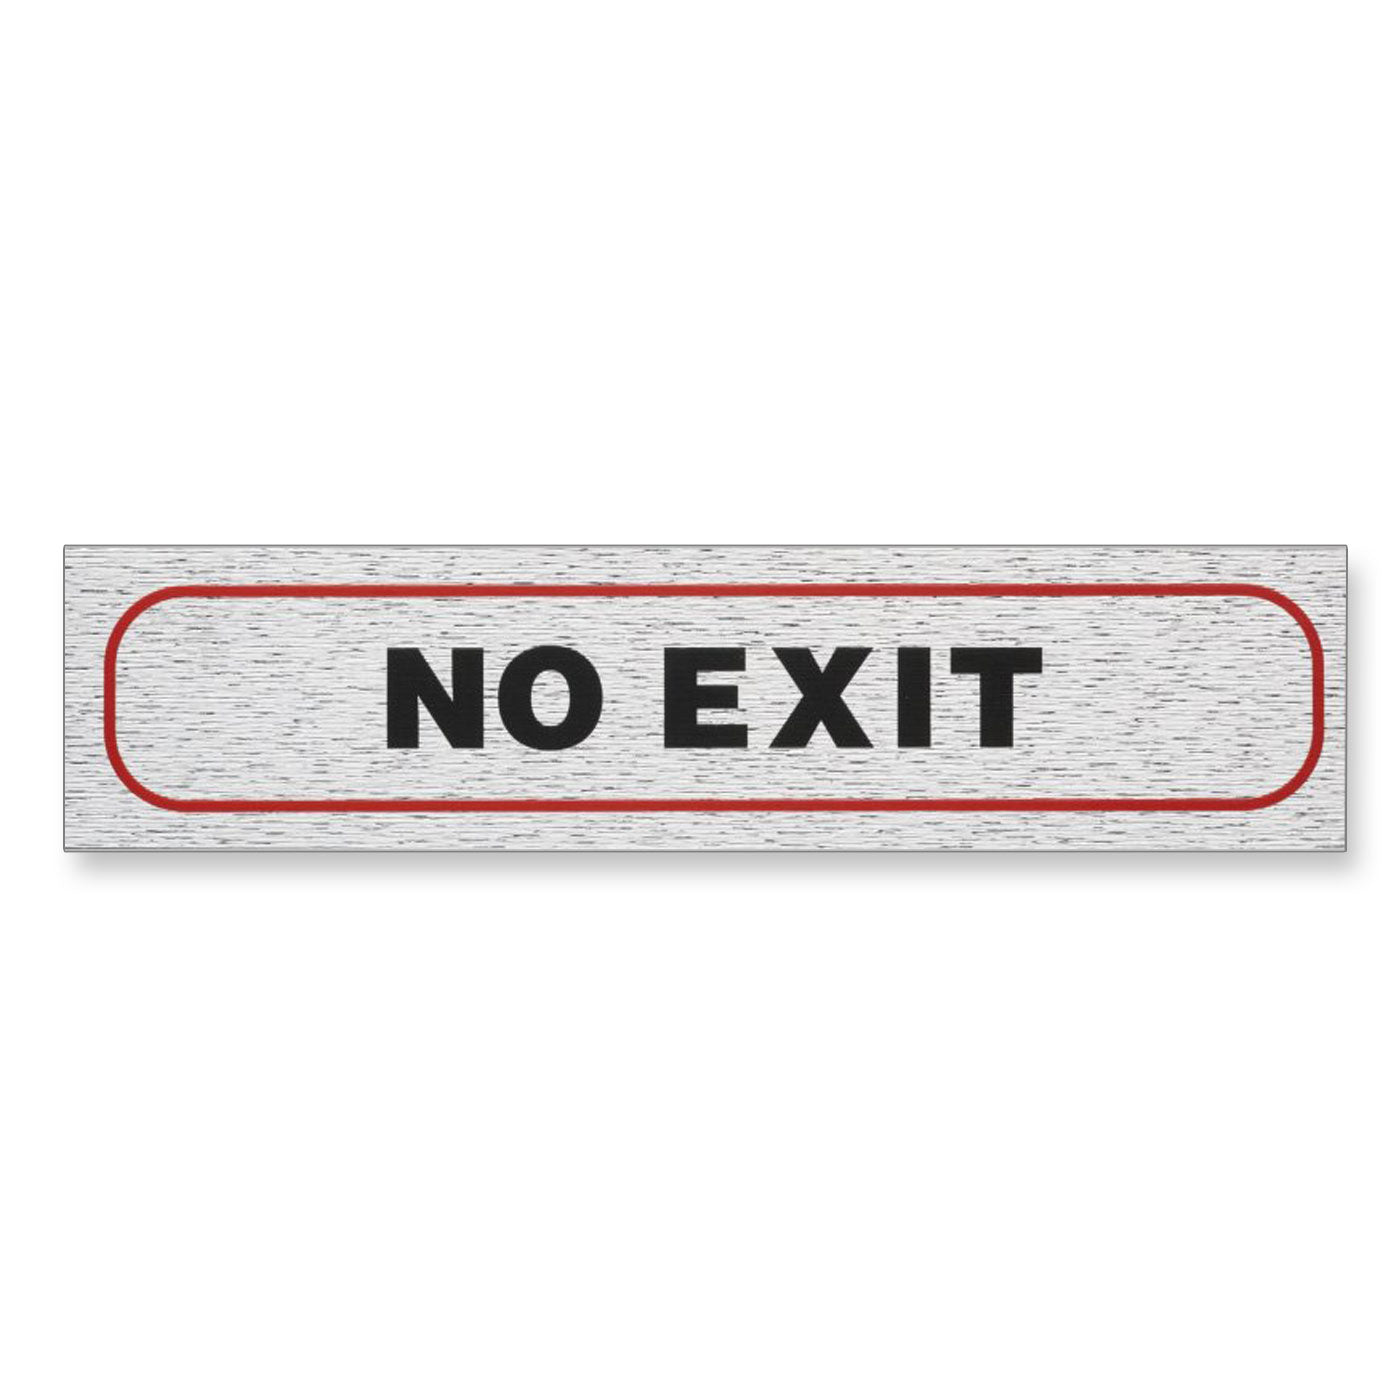 Information Sign "NO EXIT" 17 x 4 cm [Self-Adhesive]